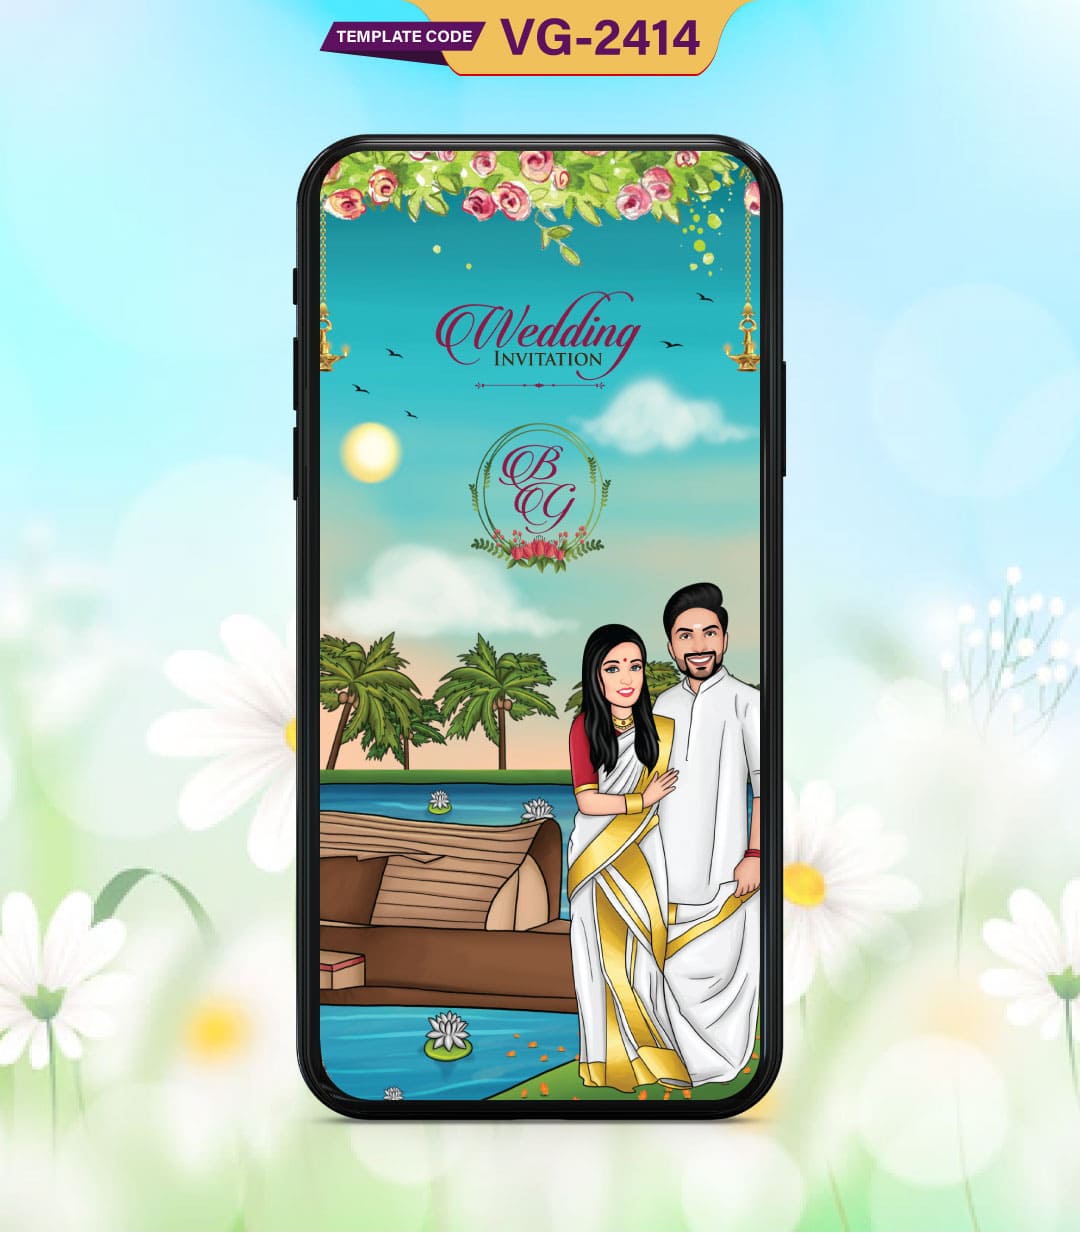 South Indian Caricature Wedding Templates